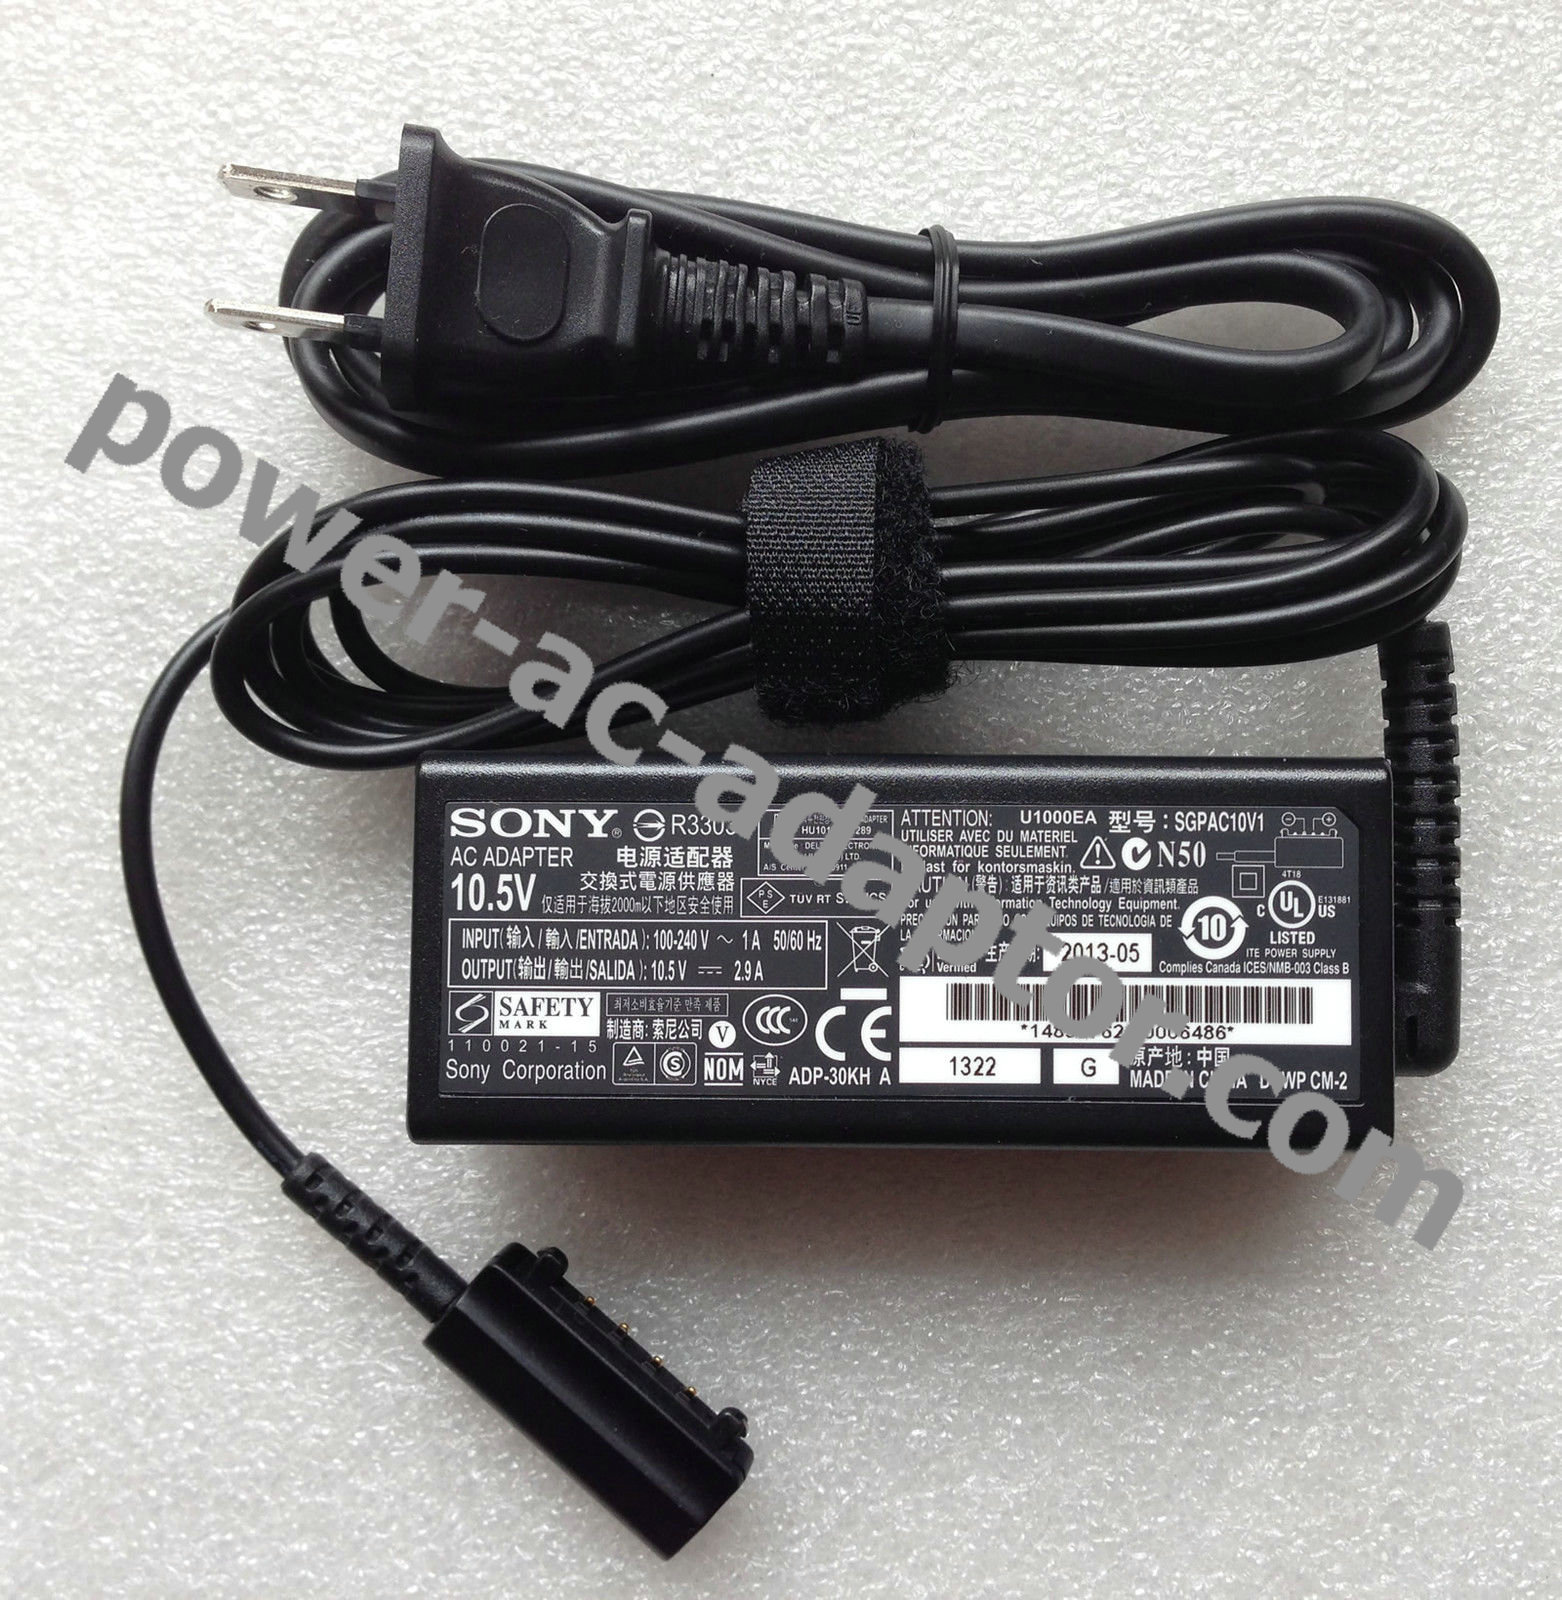 Genuine Sony Xperia Tablet SGPT111ATS SGPAC10V1 AC Adapter Cord